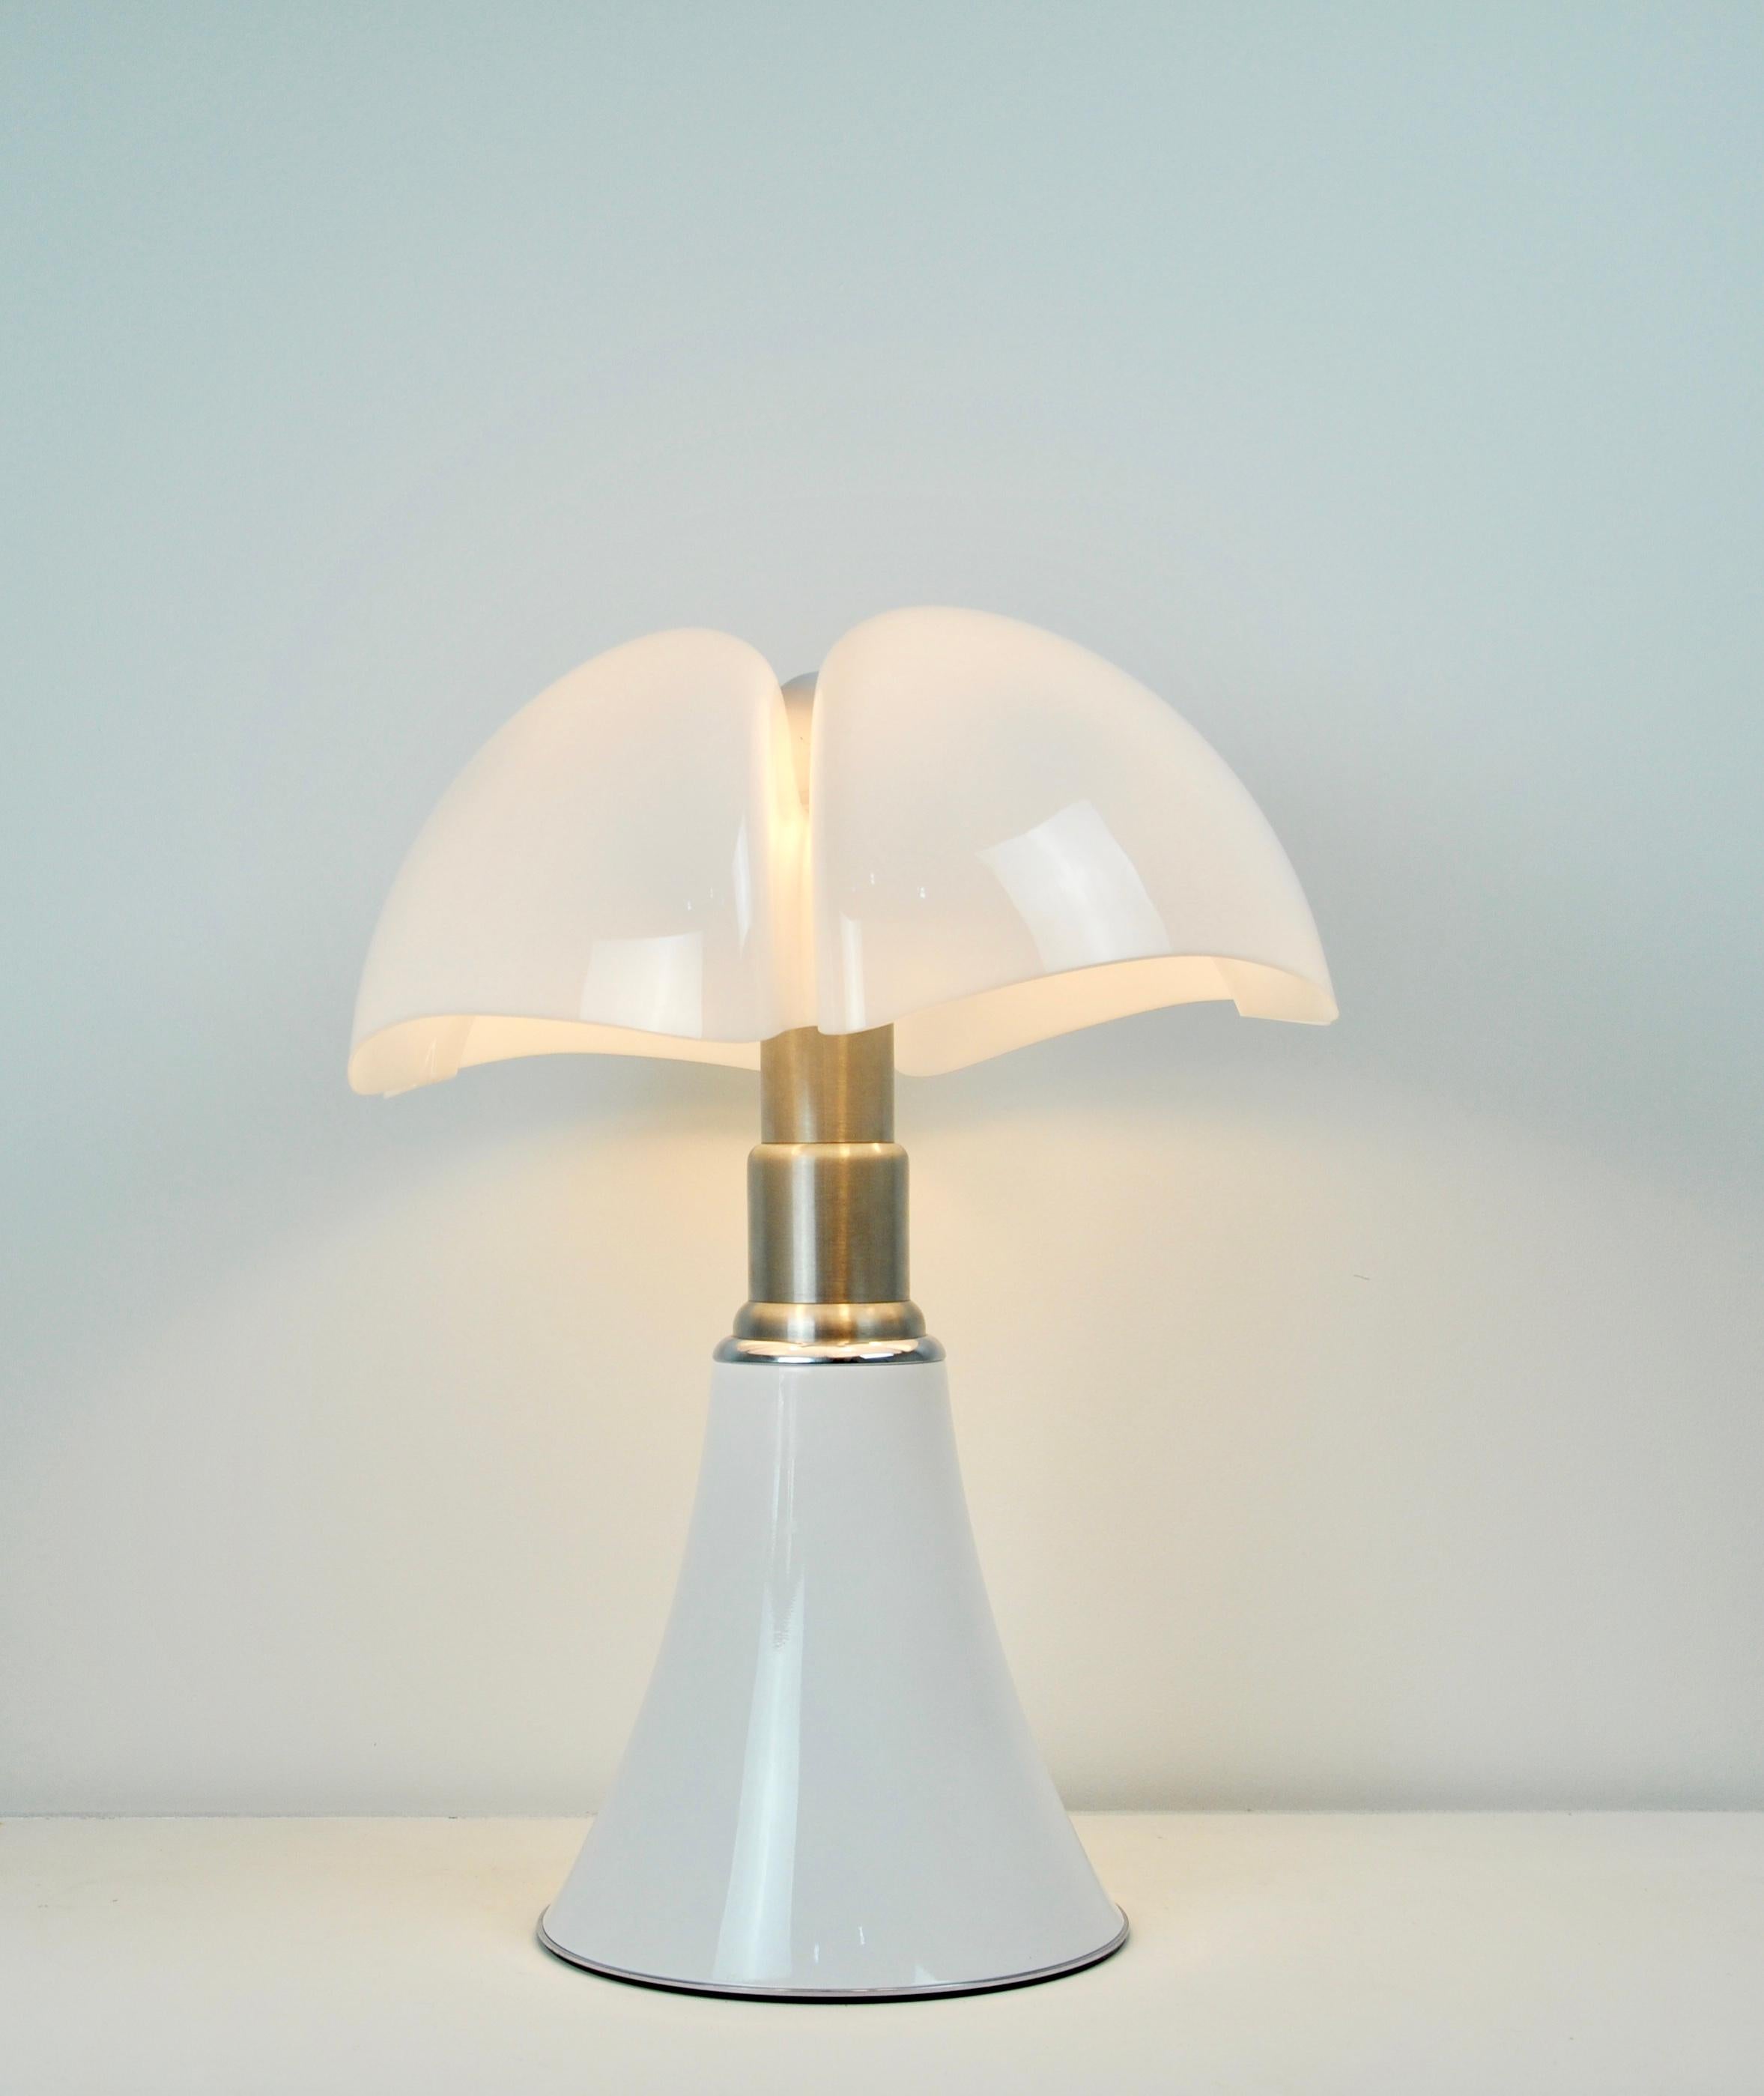 Pipistrello lamp by Gae Aulenti, stamped under the lamp (see photo) light wear due to the time and the age of the object. Lamp adjustable in height. Maximum height 87cm Minimun 70cm.